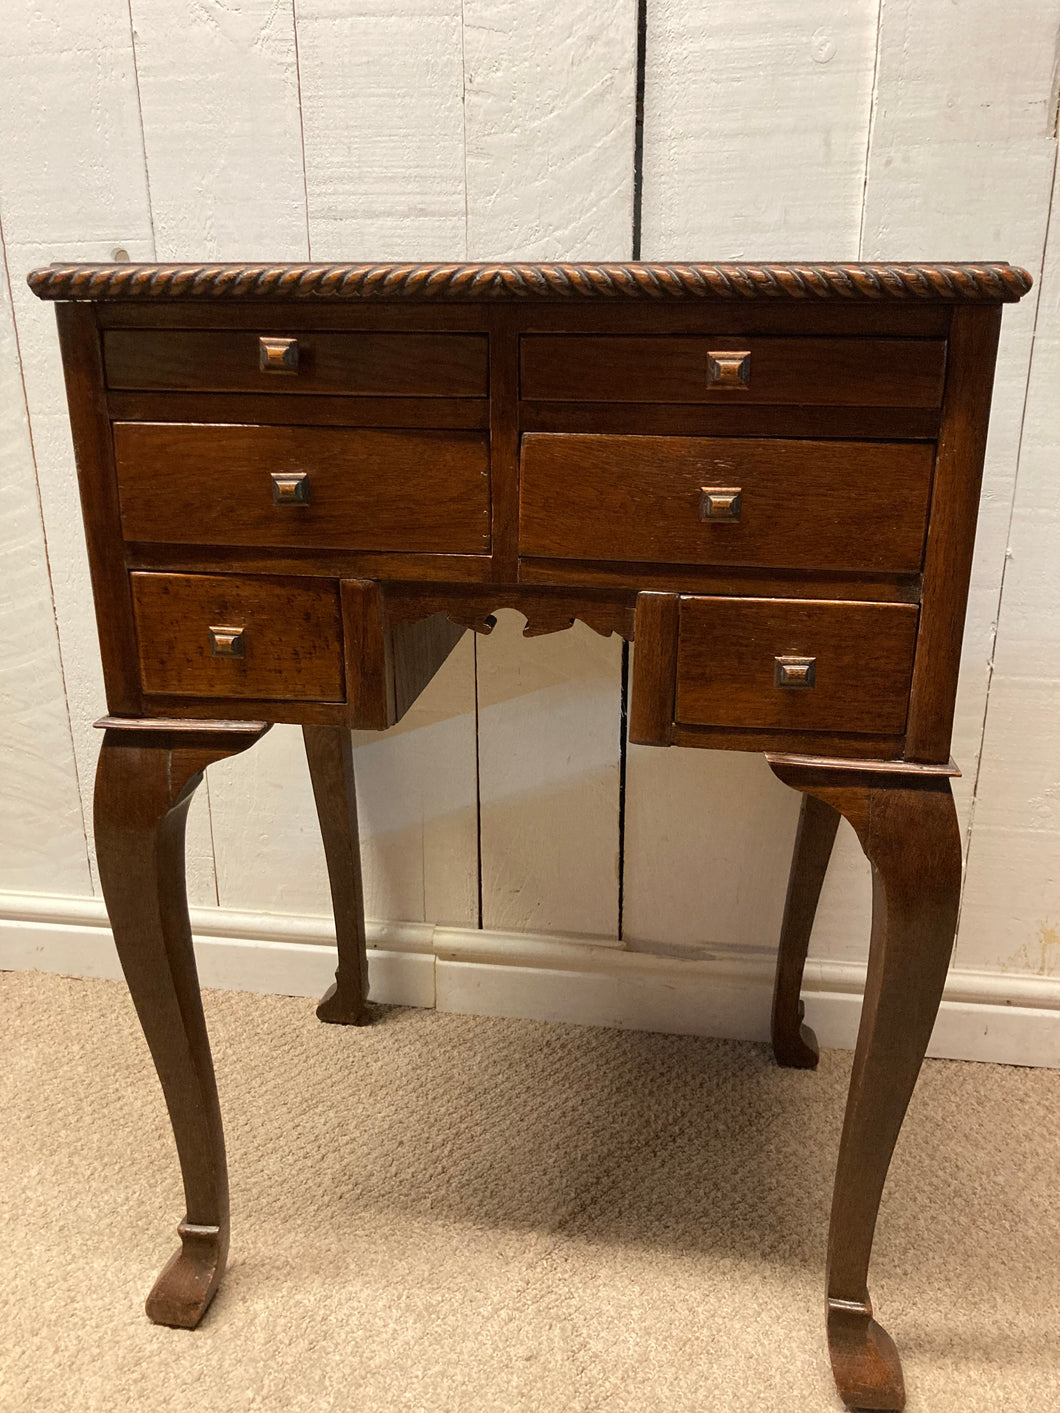 Antique Side Table Lamp Table Six Small Drawers In Need Of Some TLC